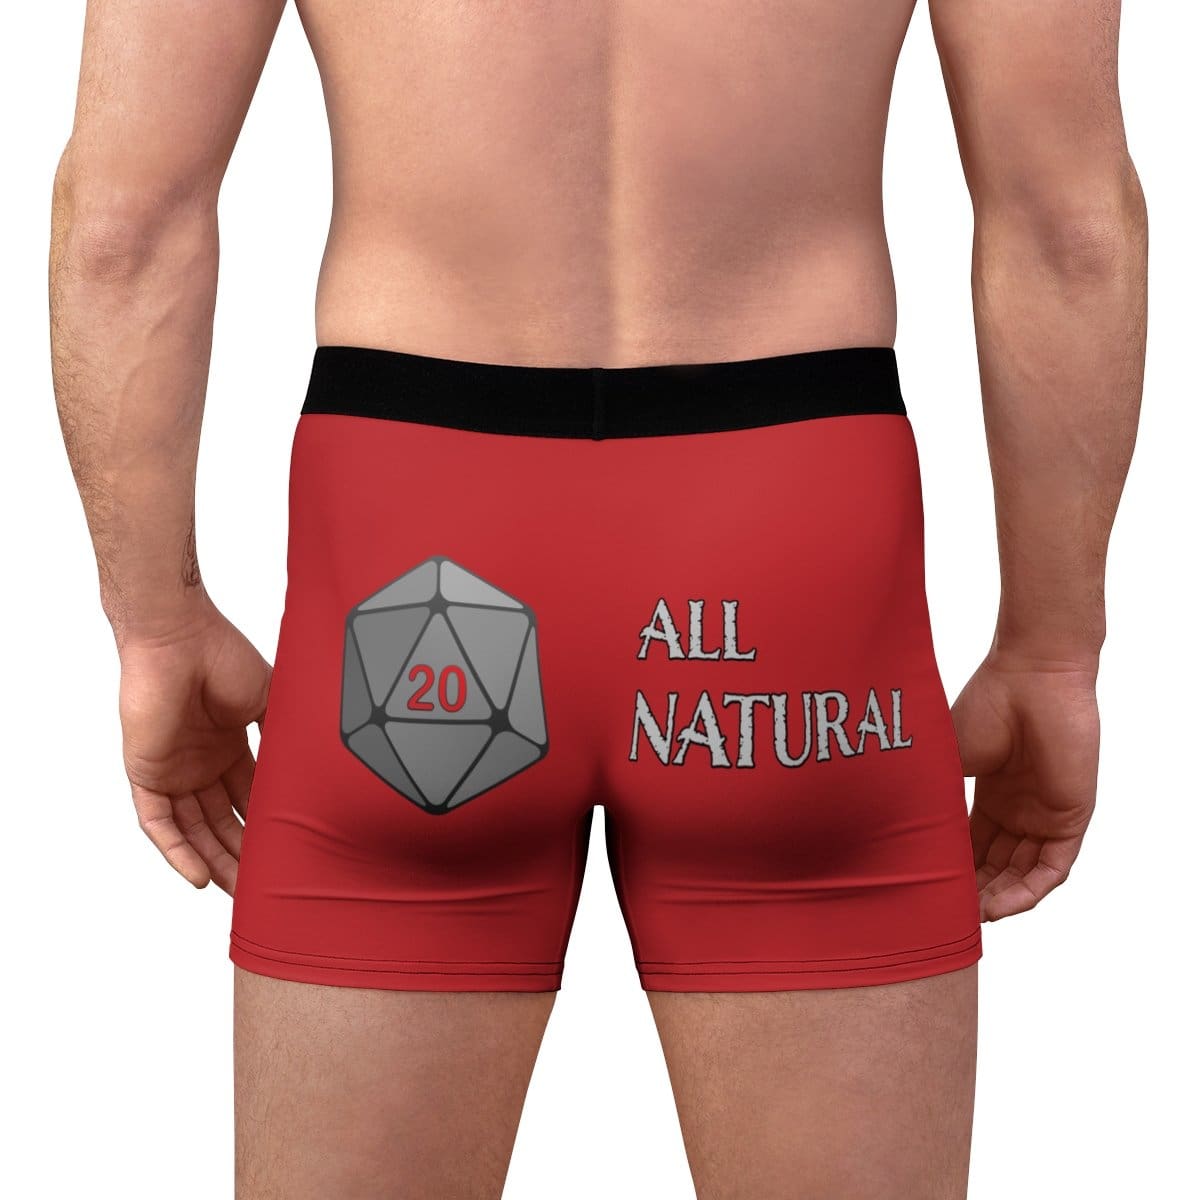 D20 All Natural - Grey on Red Boxer Briefs - L / Black Seams - All Over Prints